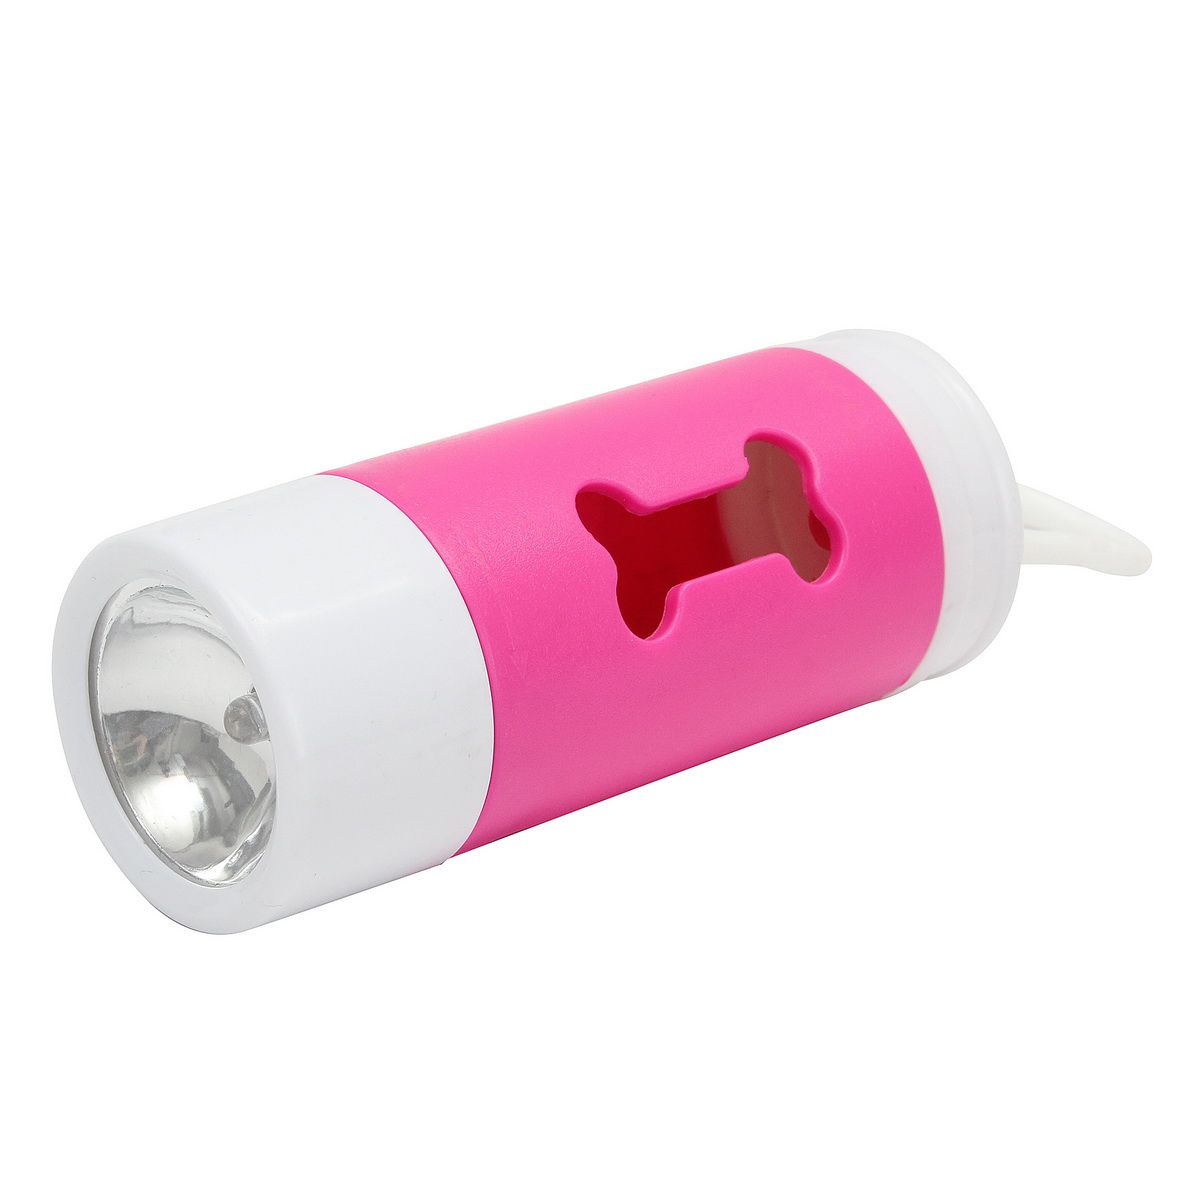 LED-Flashlight-Dispenser-For-Pet-Dog-Cat-Poop-Scoop-Waste-Bags-Roll-Refill-Clean-Up-1243510